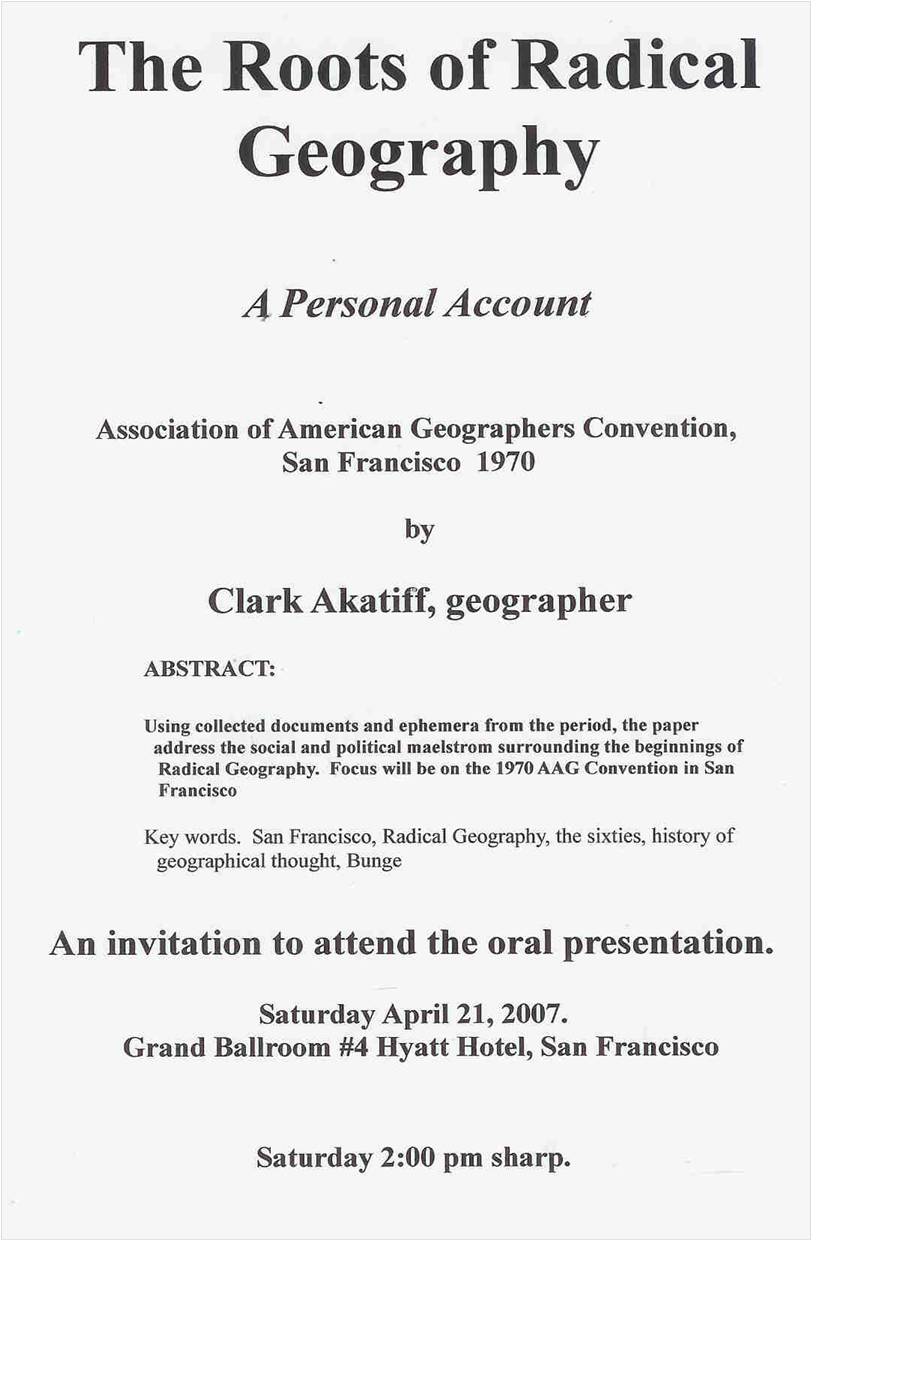 The roots of radical geography (2007 AAG annual meeting, San Francisco)